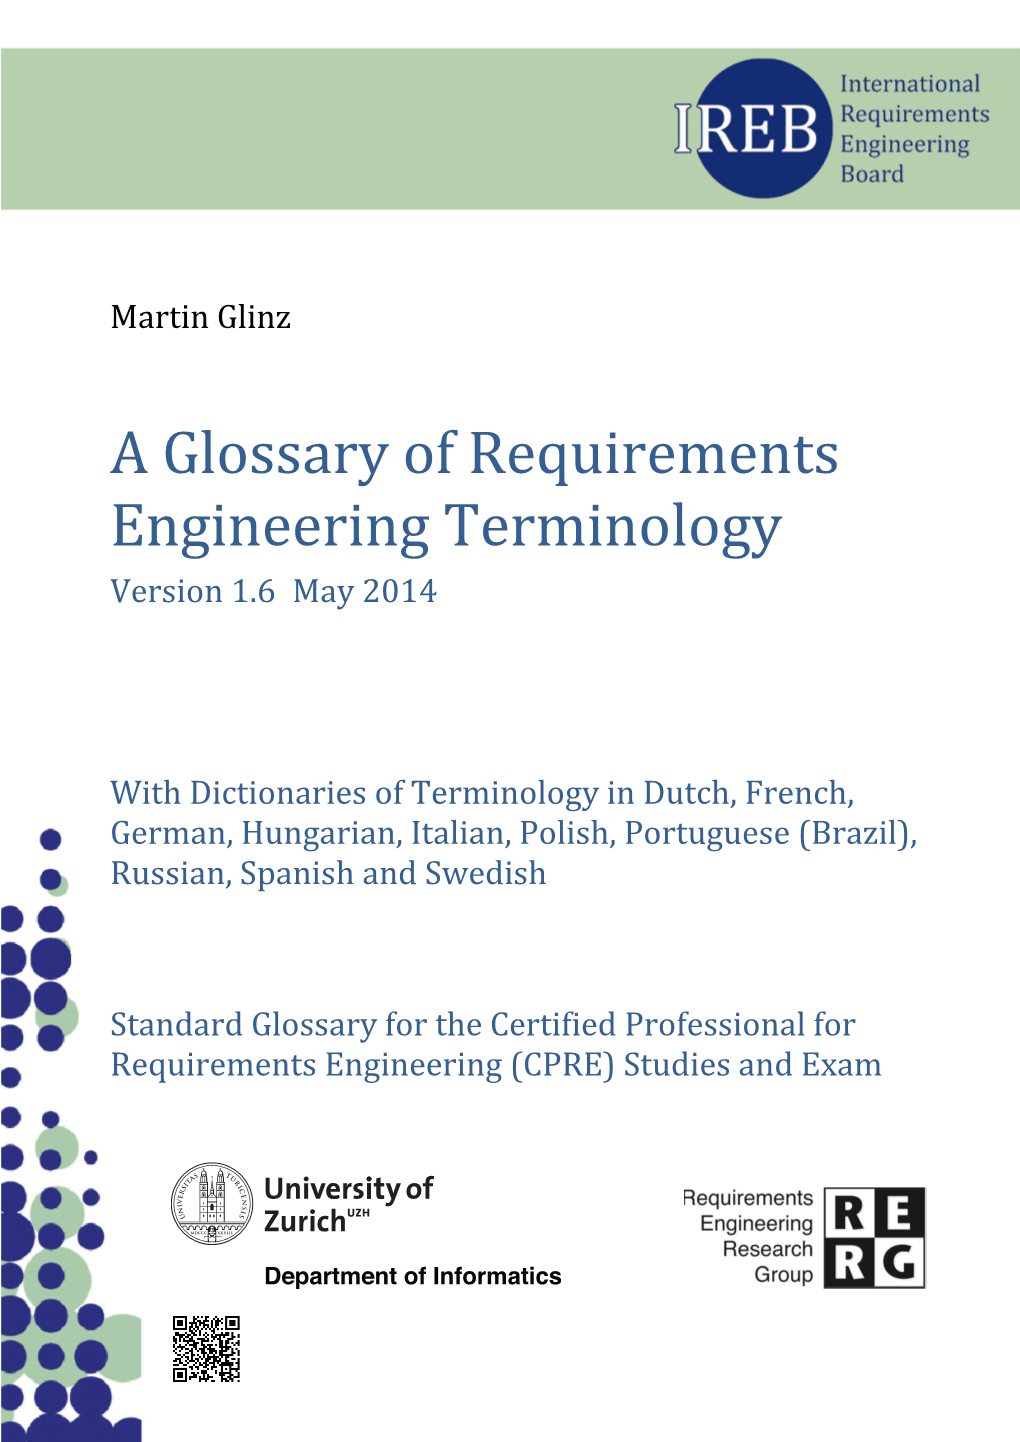 A Glossary of Requirements Engineering Terminology Version 1.6 May 2014